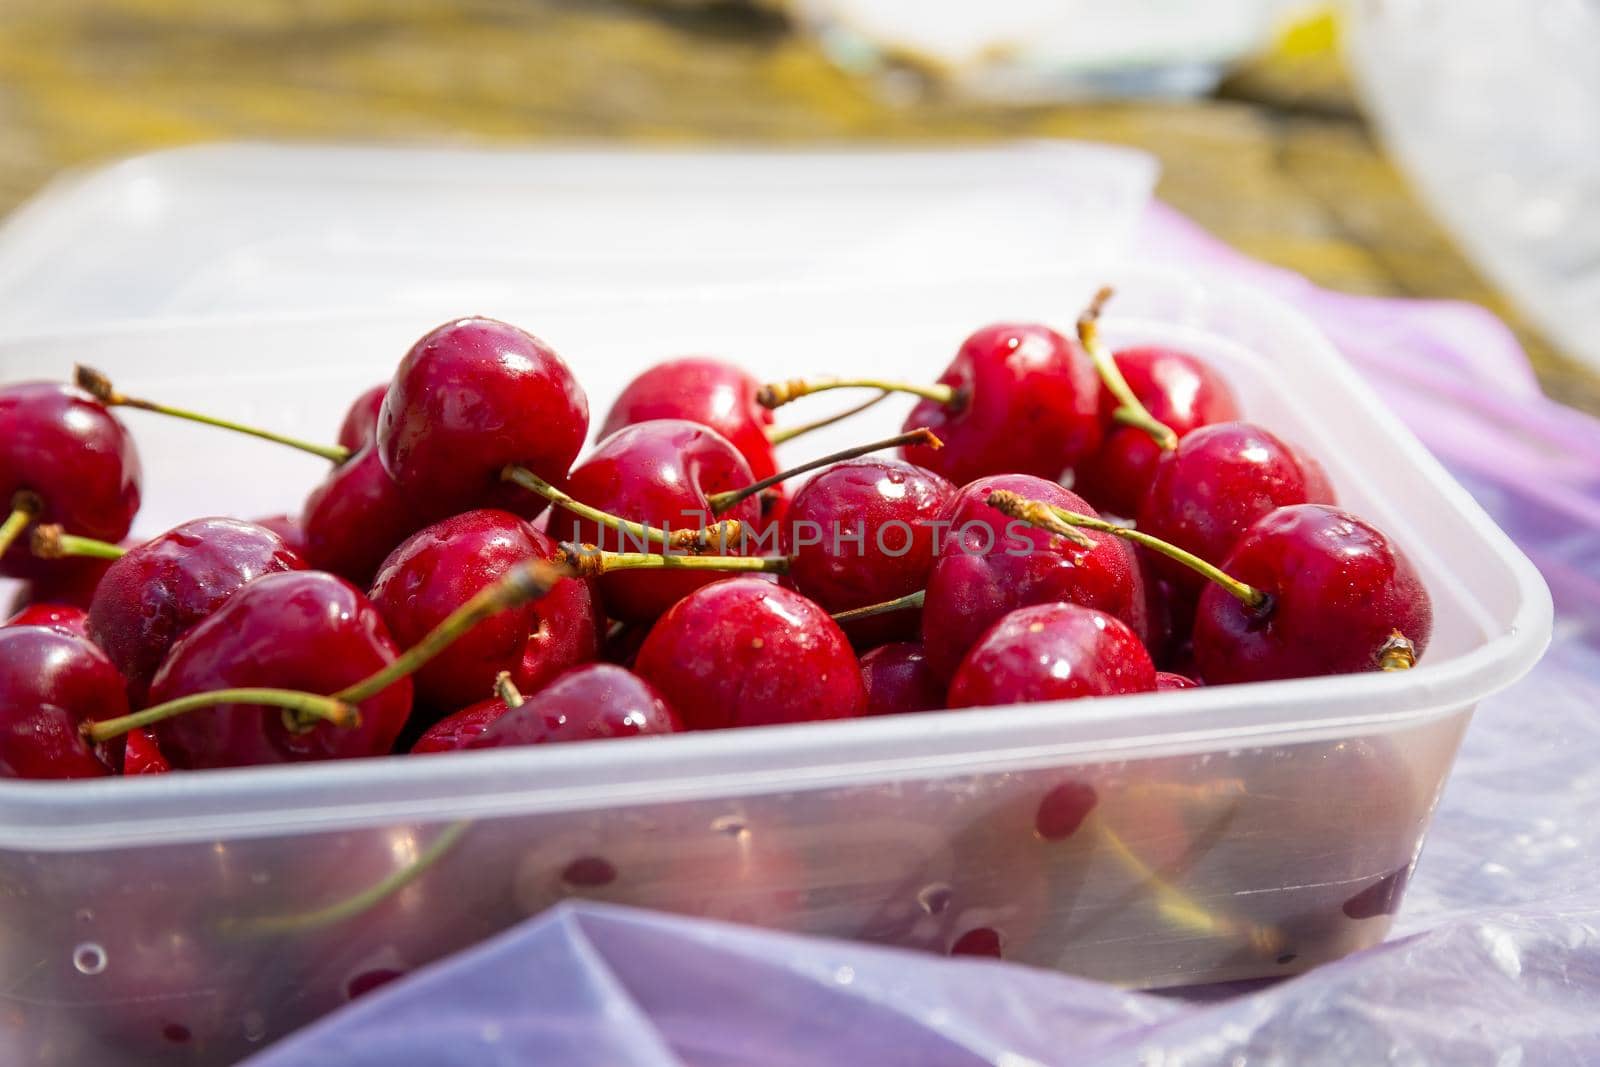 Container full of ripe, red, fresh cherries, freshly washed.